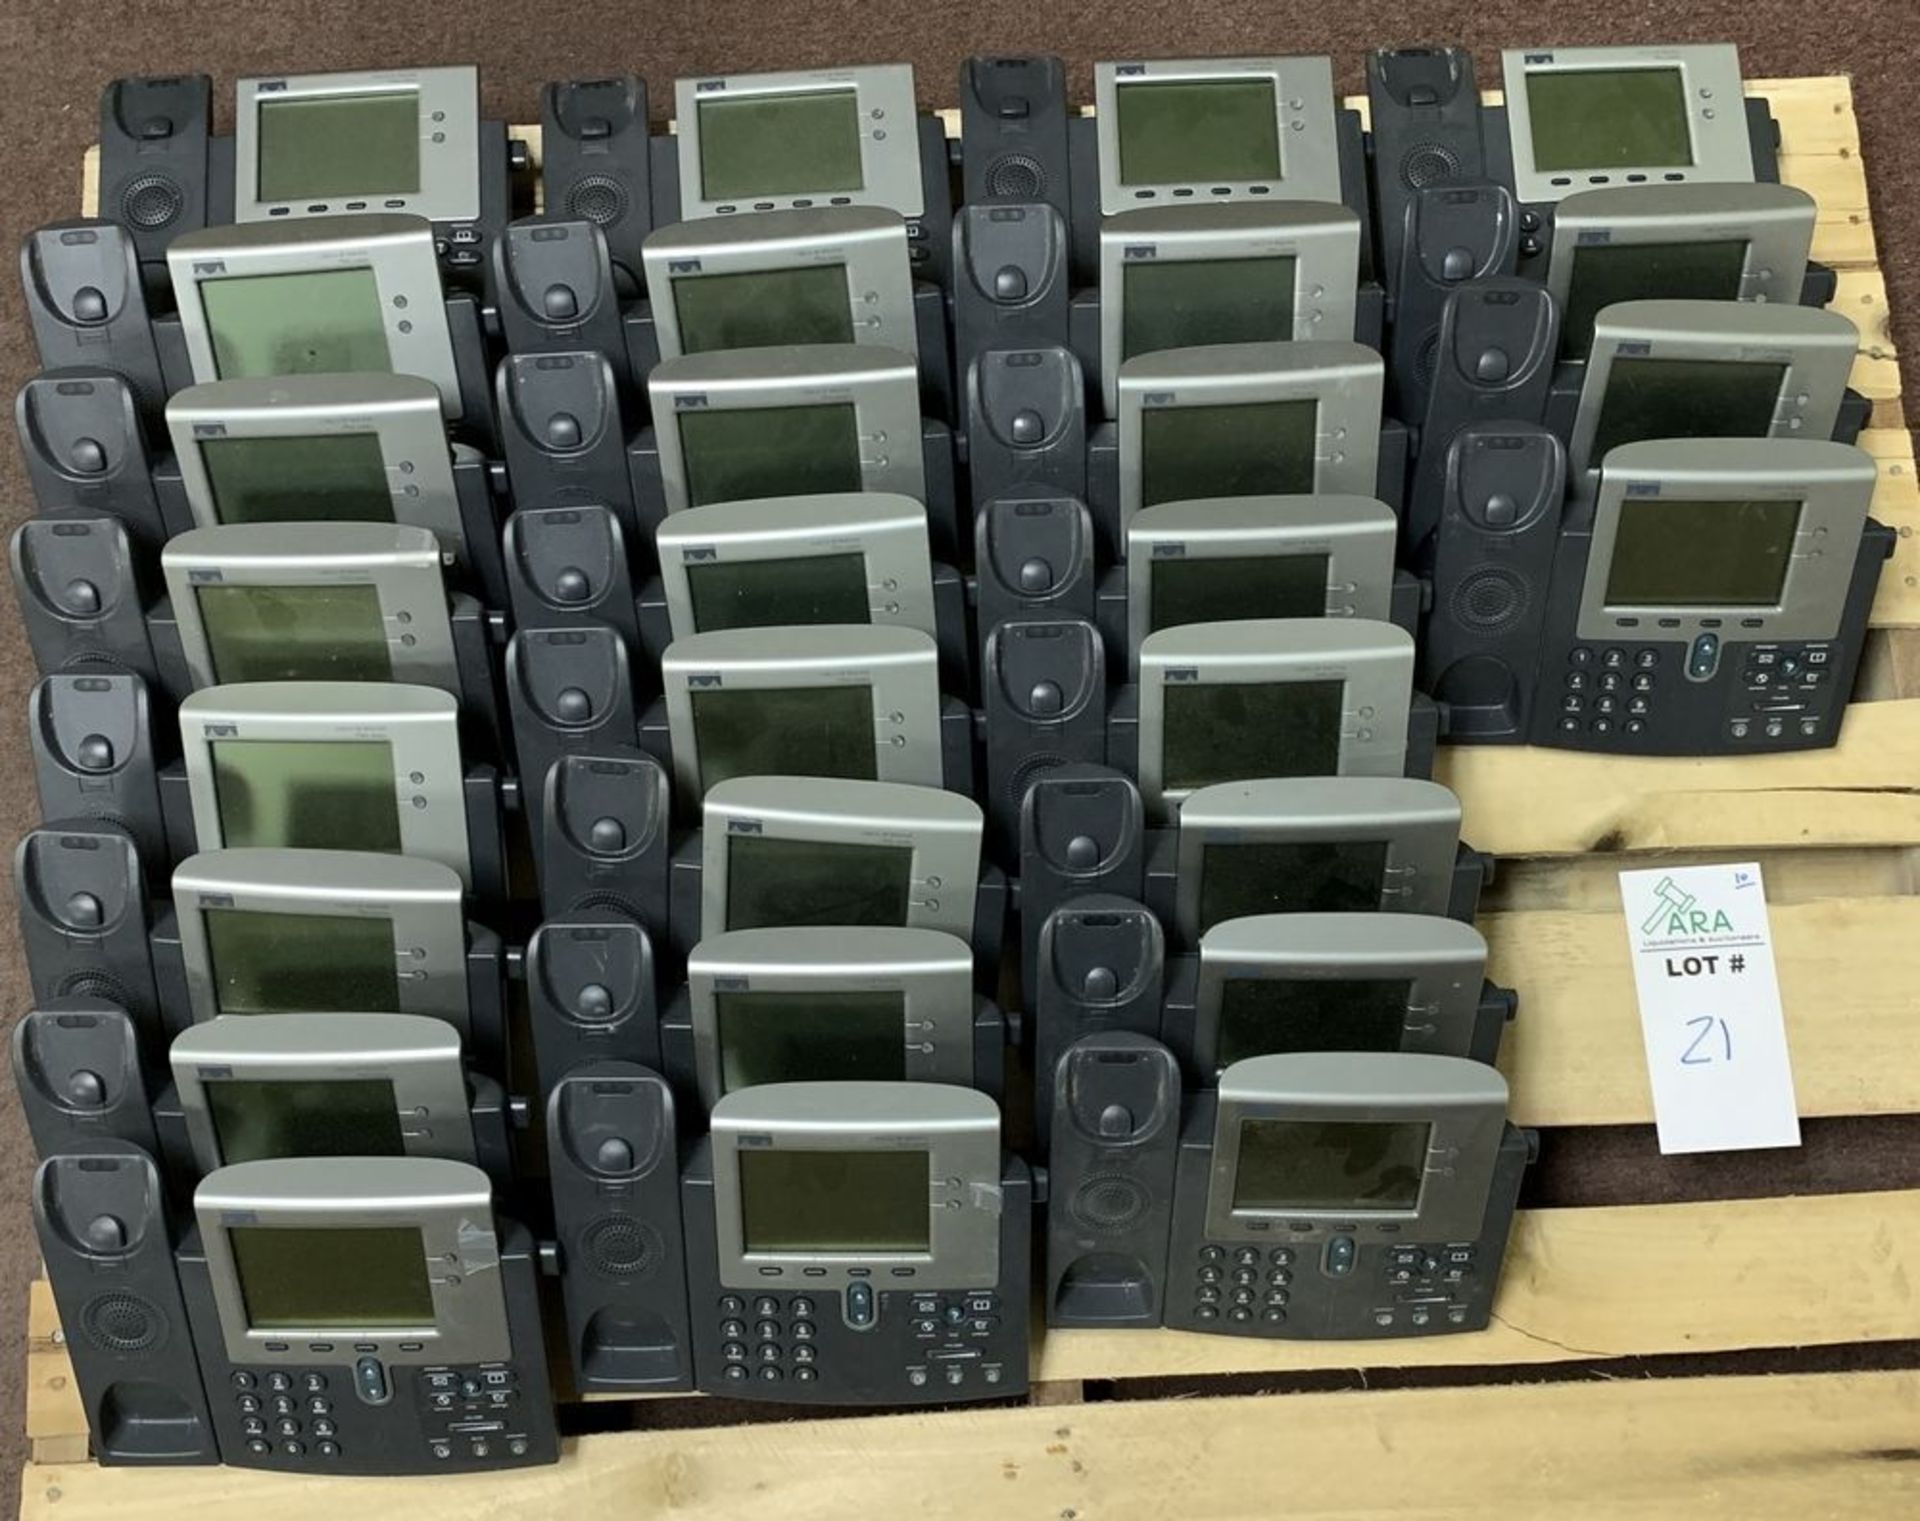 28 CISCO PHONE SYSTEMS - MODEL 7941 ALL ITEMS ARE SOLD AS IS UNTESTED BUT CAME FROM A WORKING